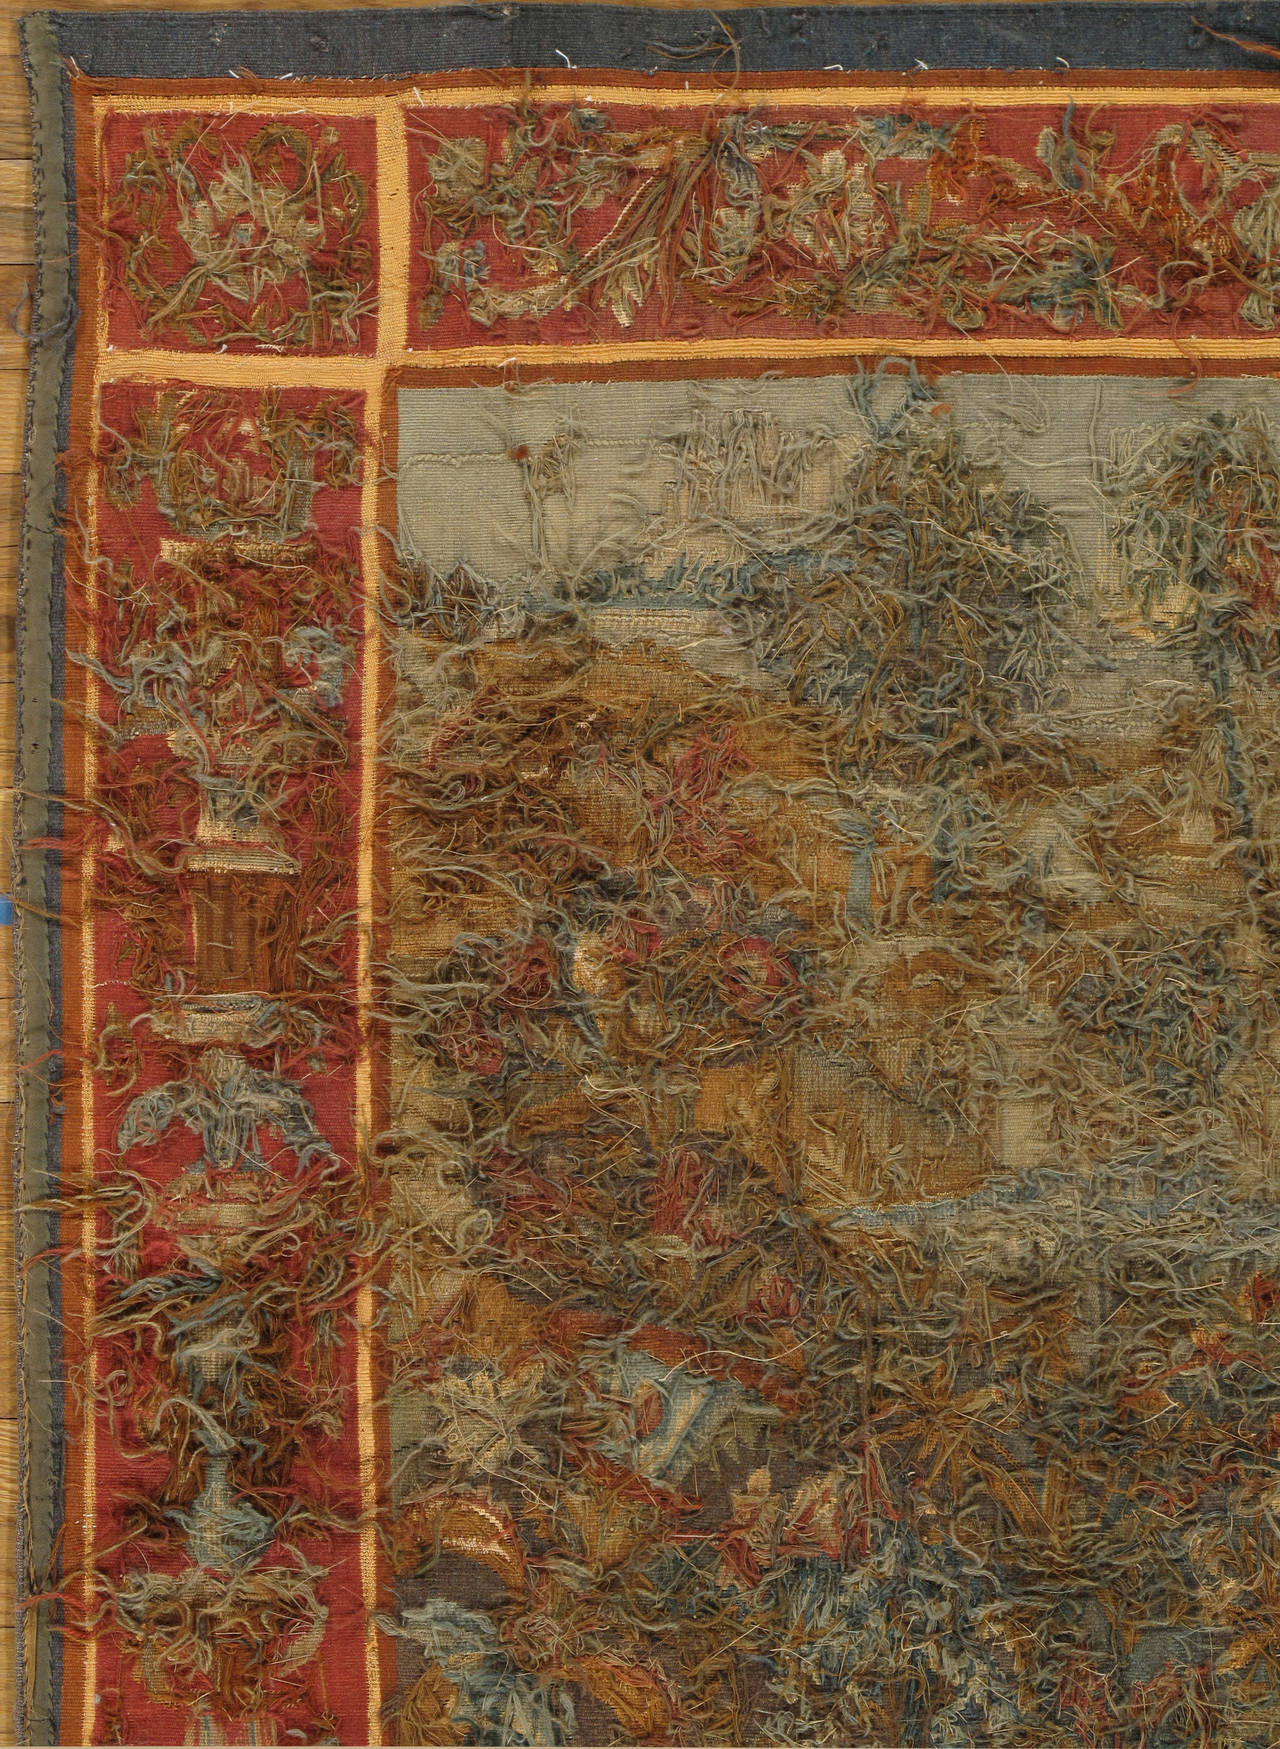 Fine French Aubusson tapestry, circa 1880. No hanging hardware included. Measures: 5.7" x 5.8".